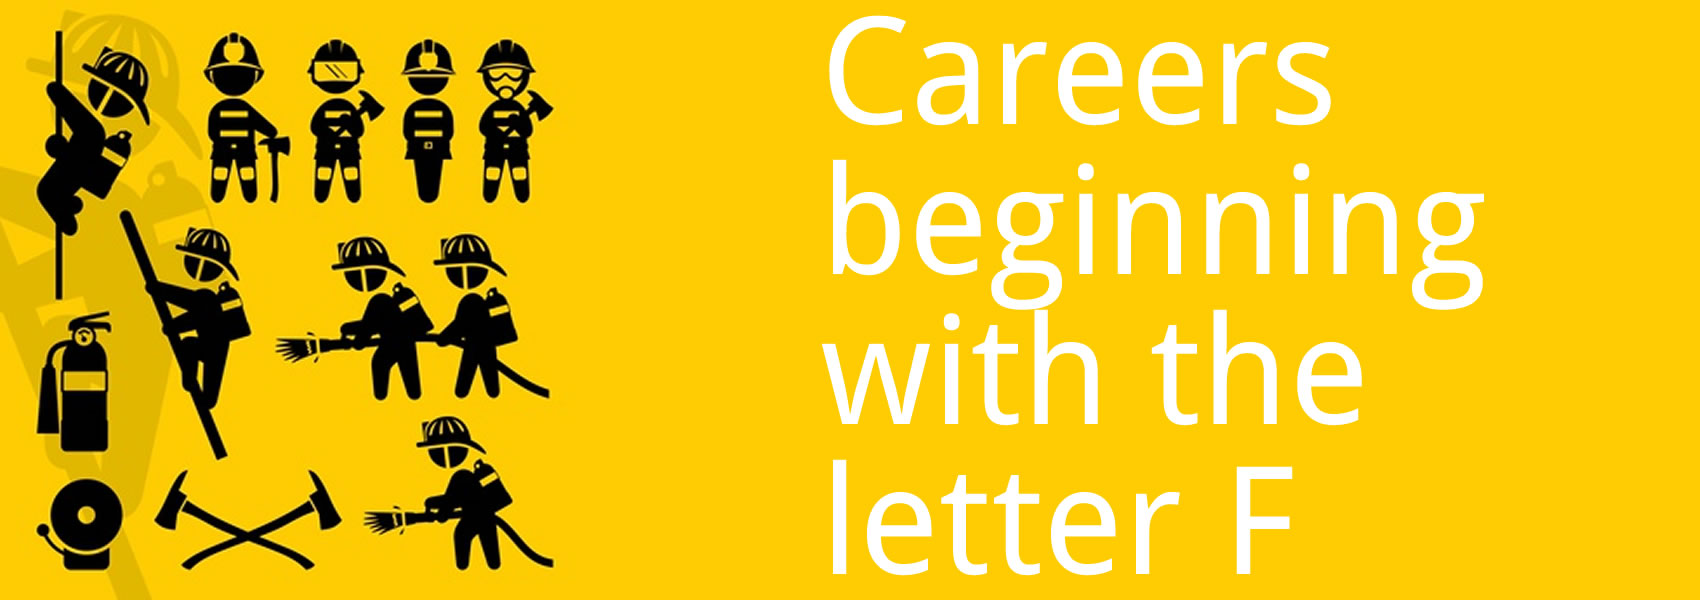 Careers beginning with the letter F Image source and credit: Fotolia copyright © jamesbin